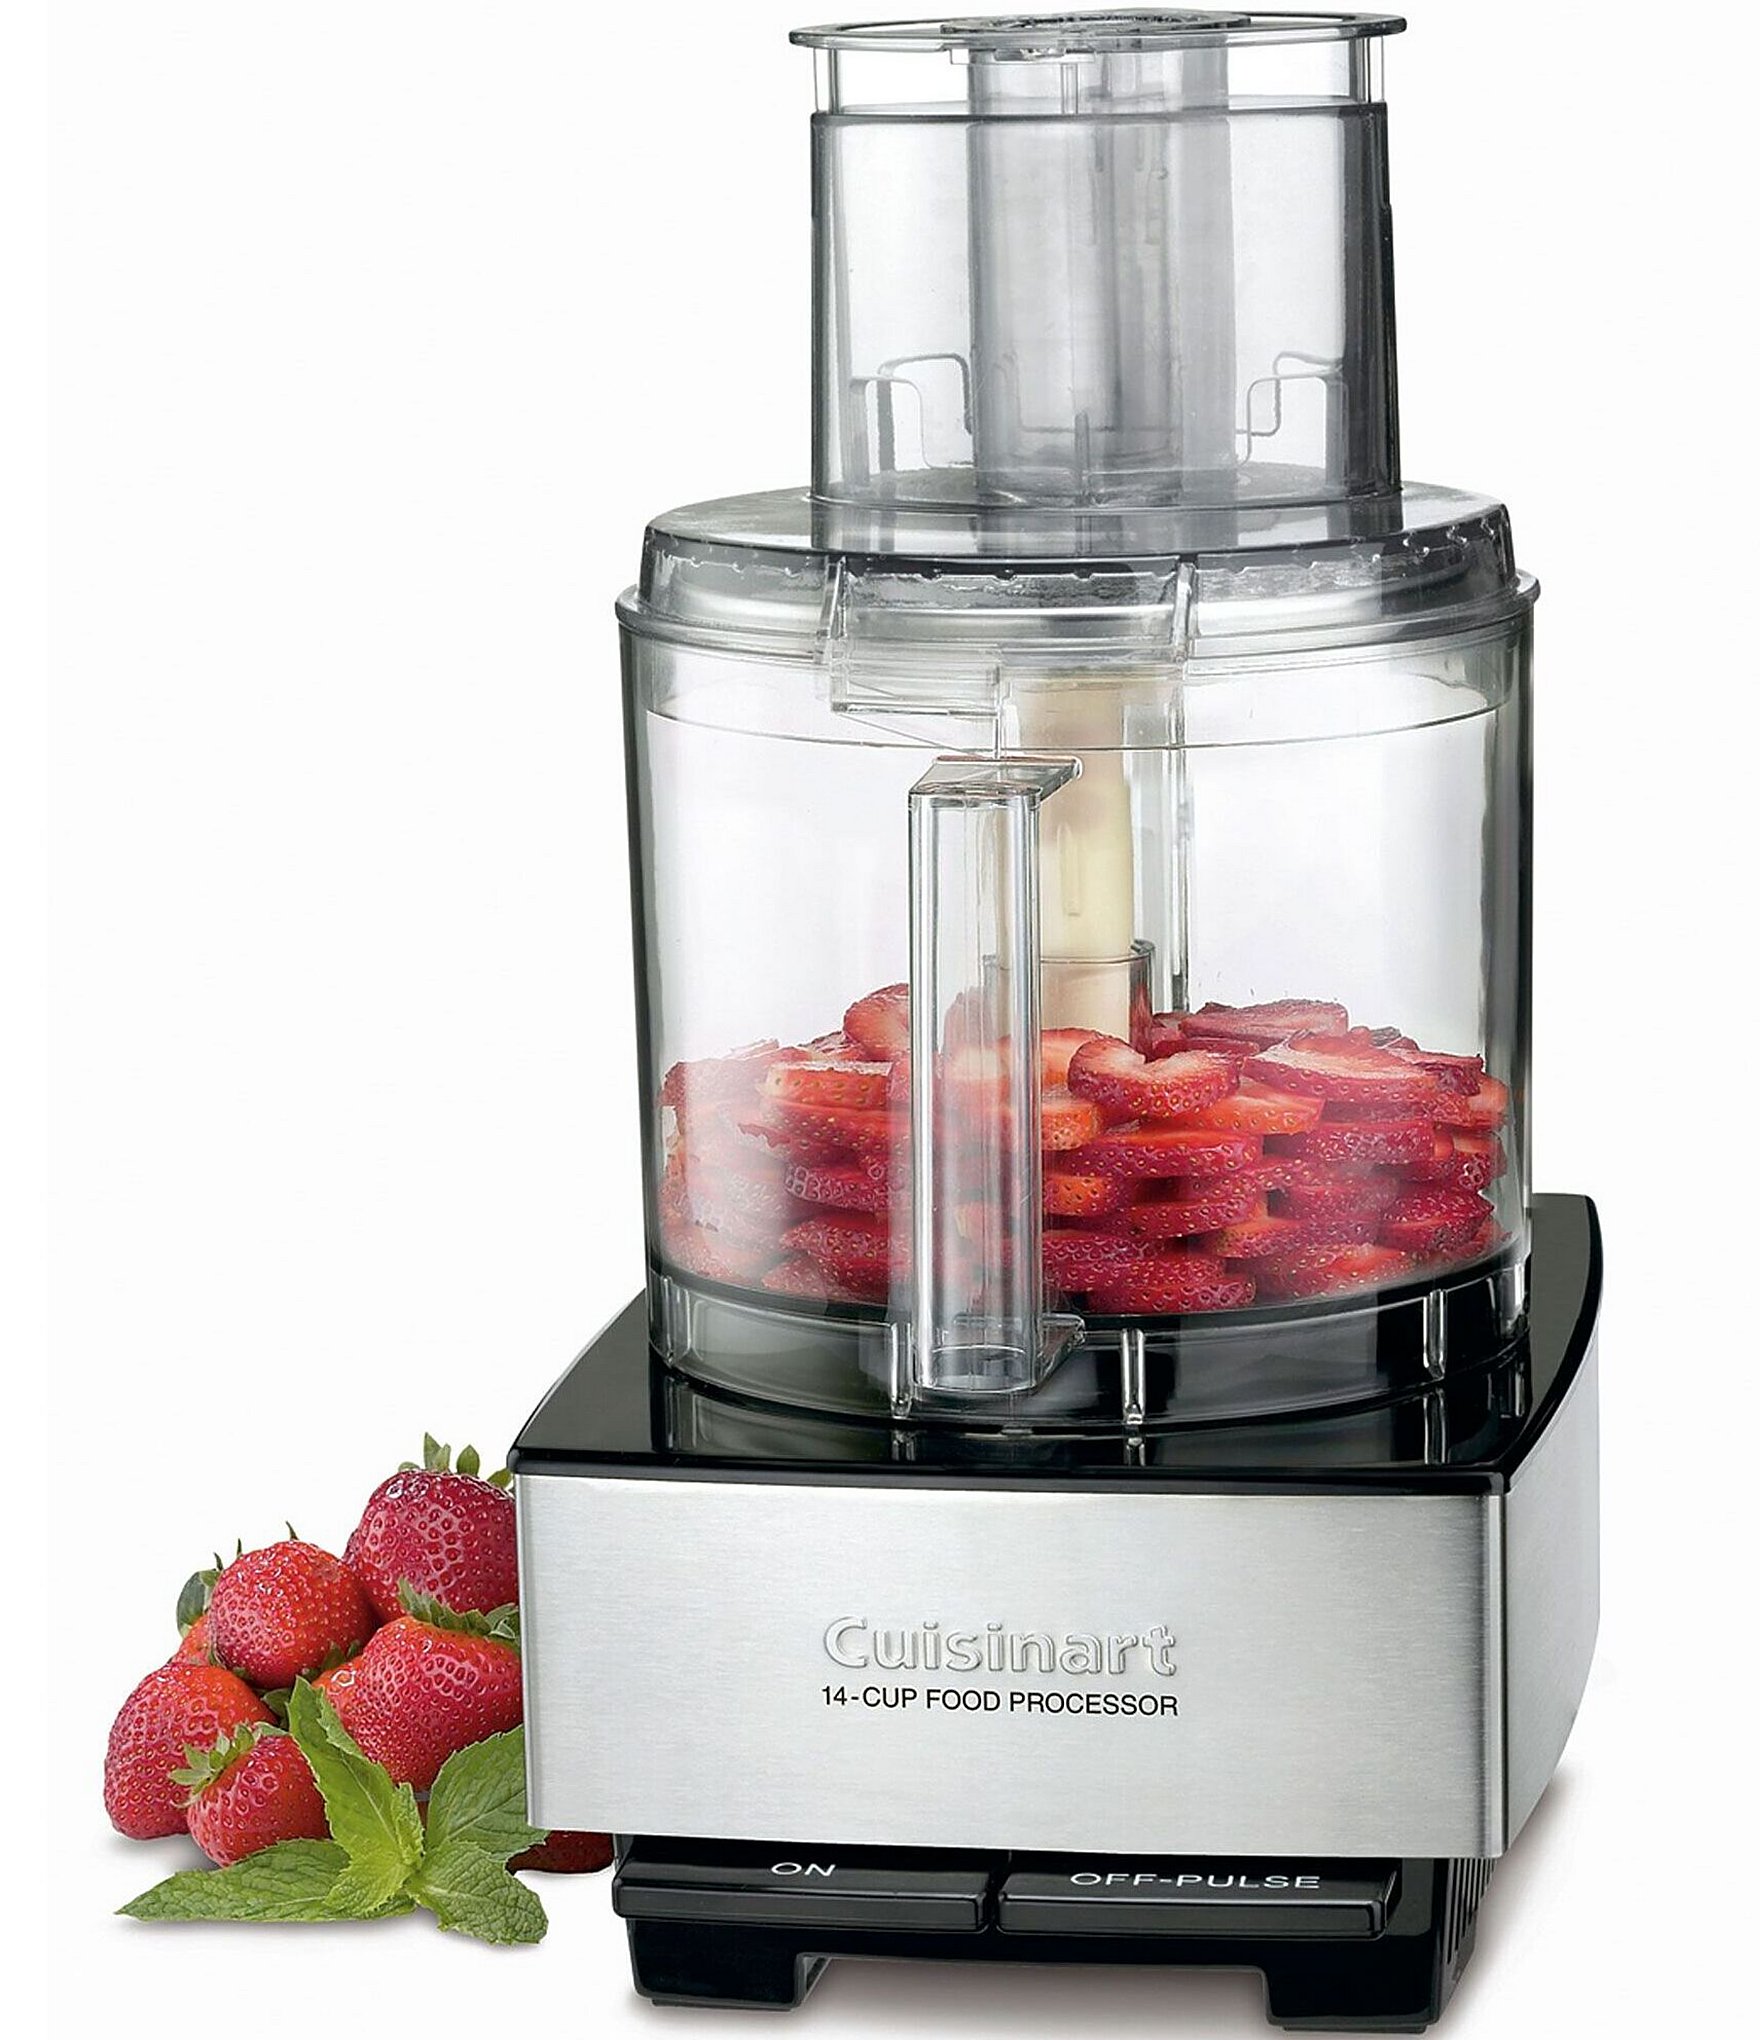 https://dimg.dillards.com/is/image/DillardsZoom/zoom/cuisinart-custom-14-cup-brushed-stainless-food-processor/02350801_zi_brushed_stainless.jpg